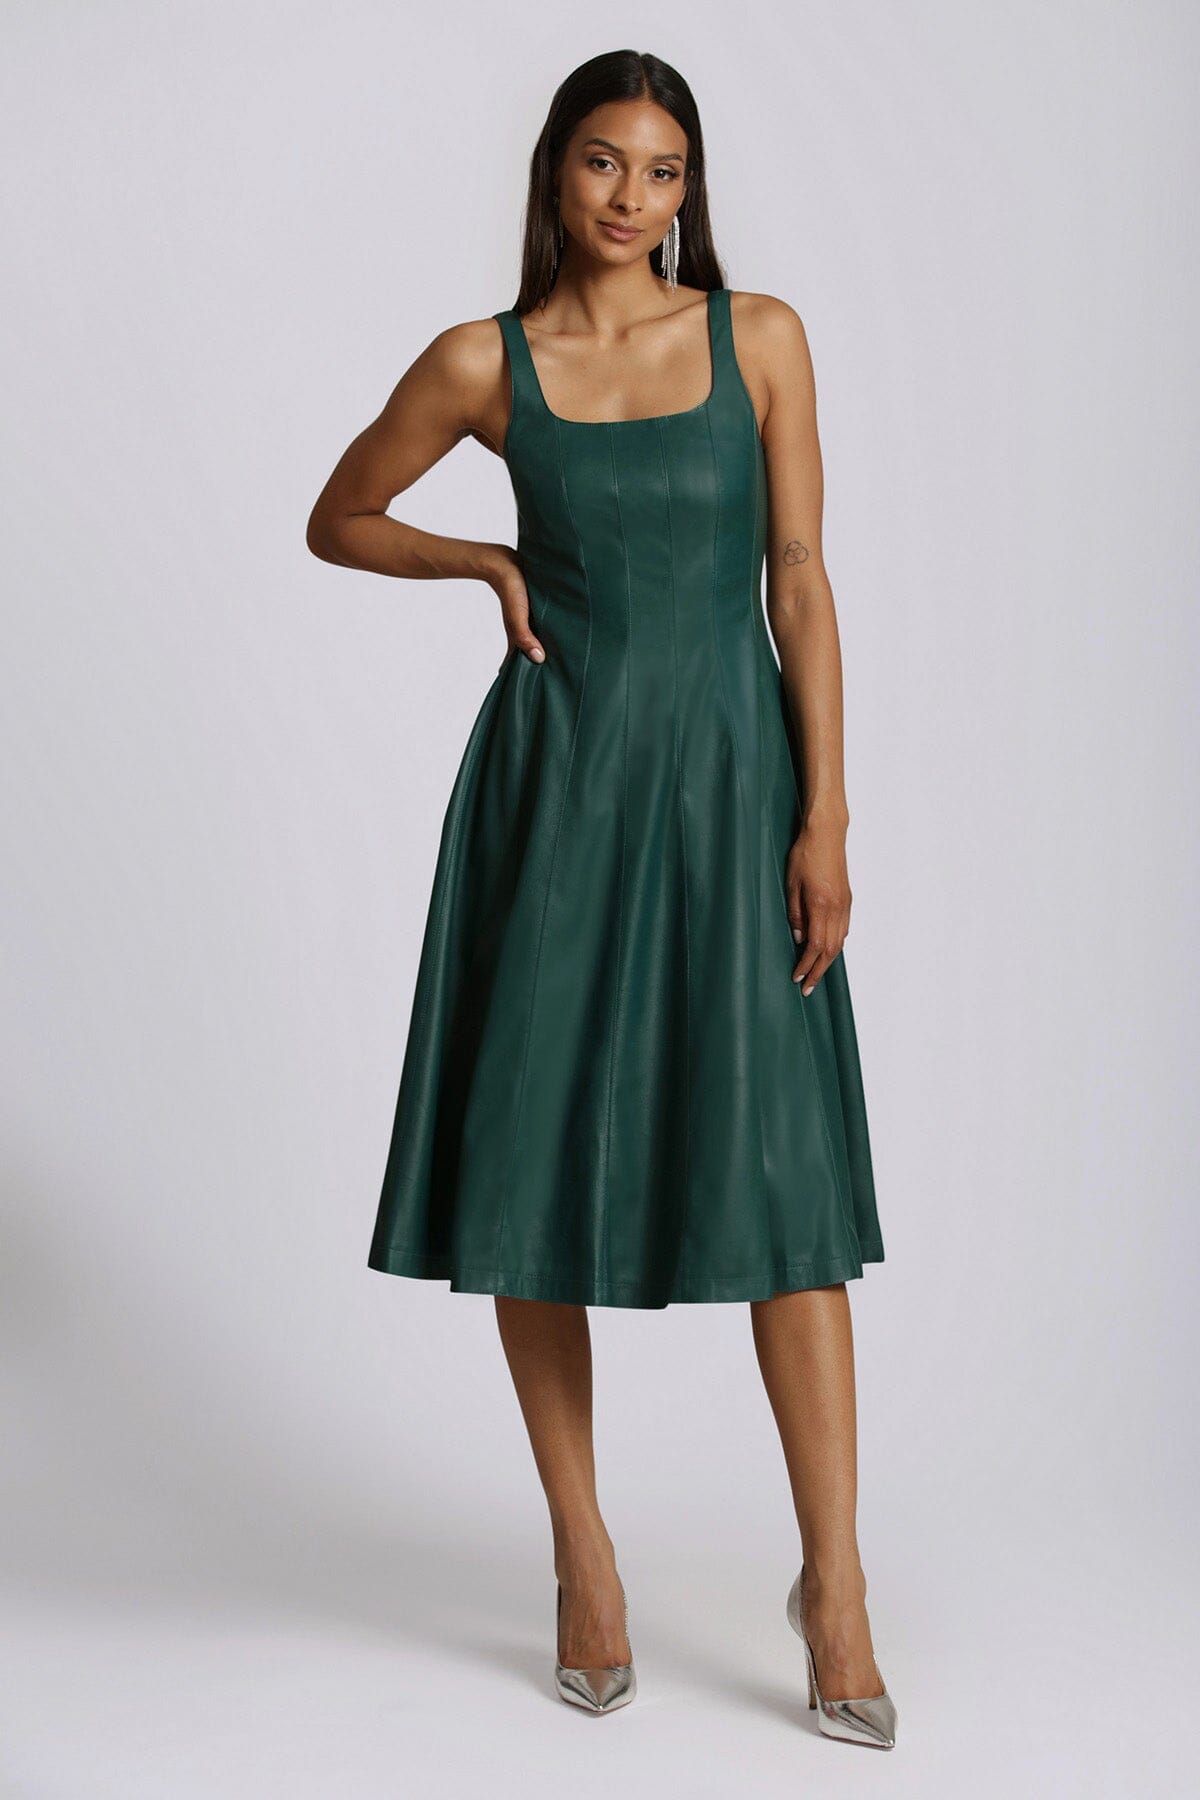 faux ever leather fit and flare midi dress pine green - figure flattering designer fashion wedding guest dresses for women